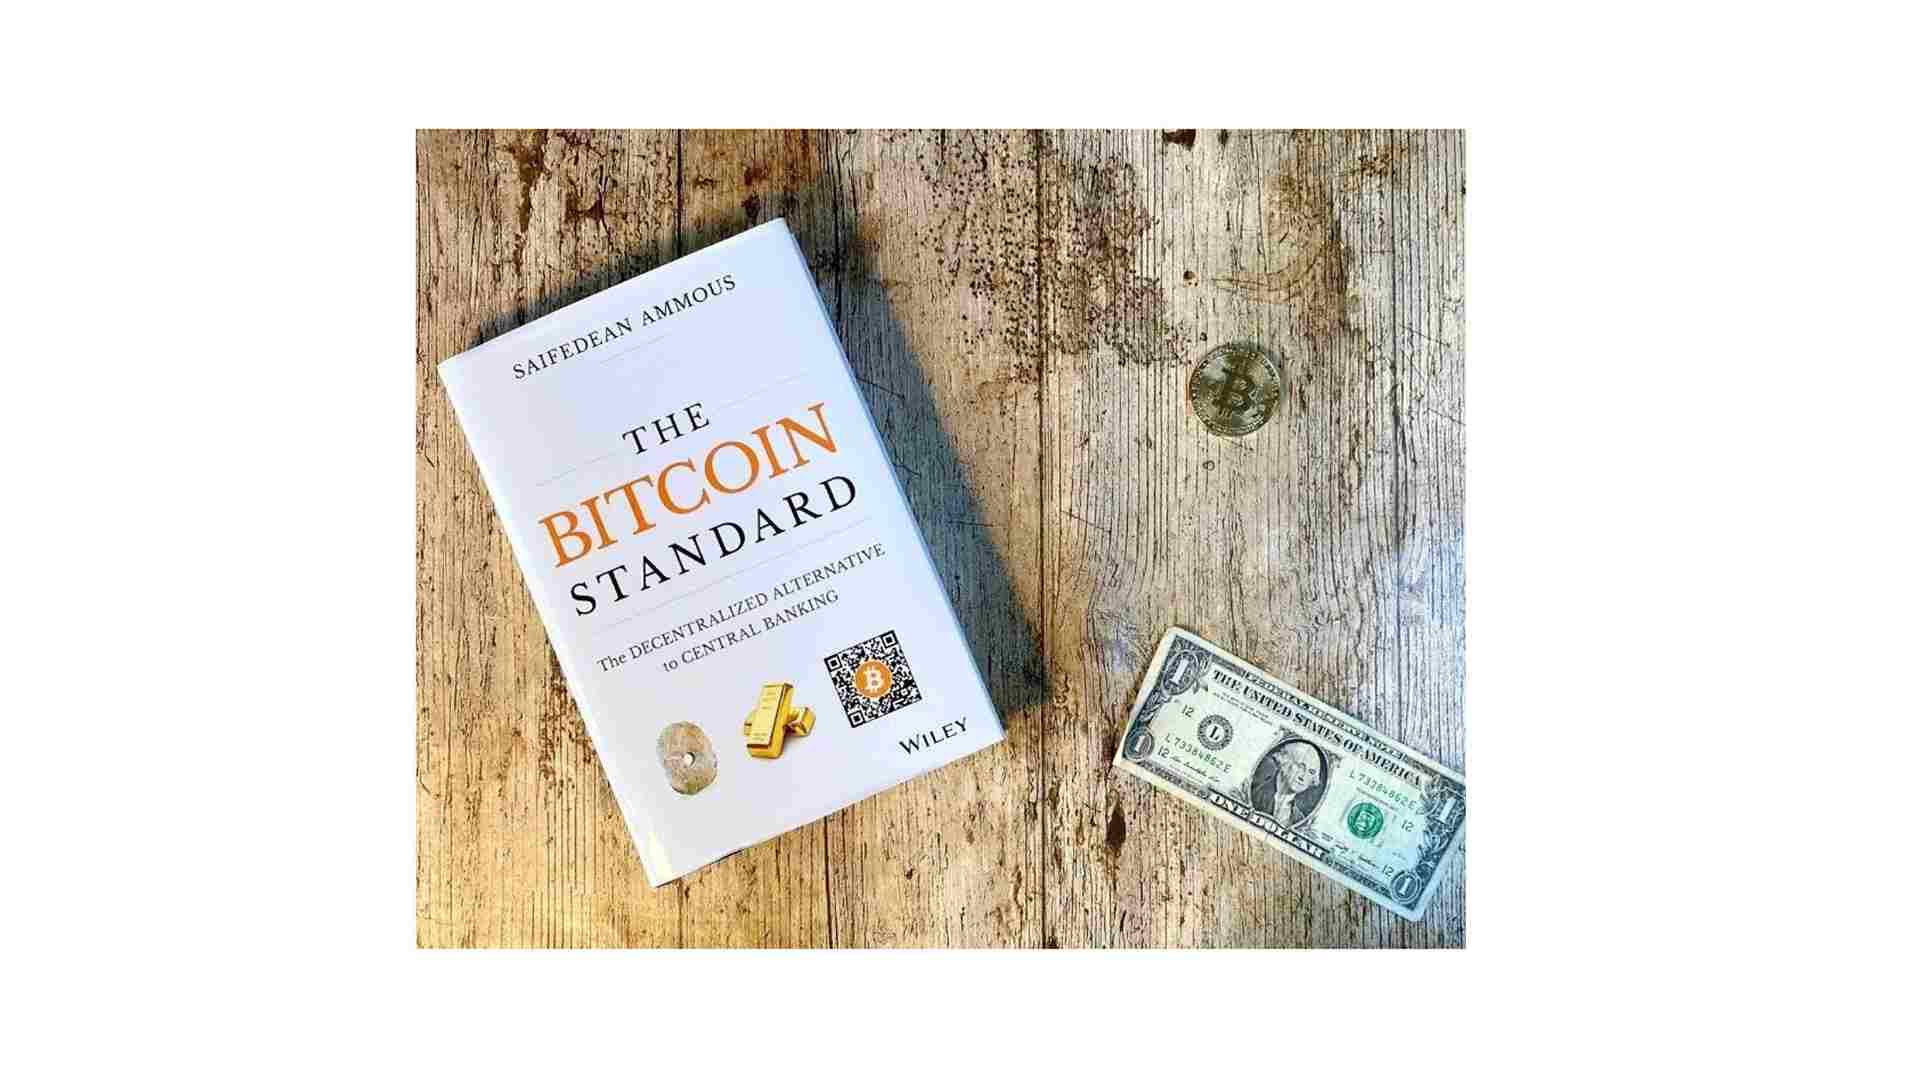 The Bitcoin Standard-cryptocurrency book